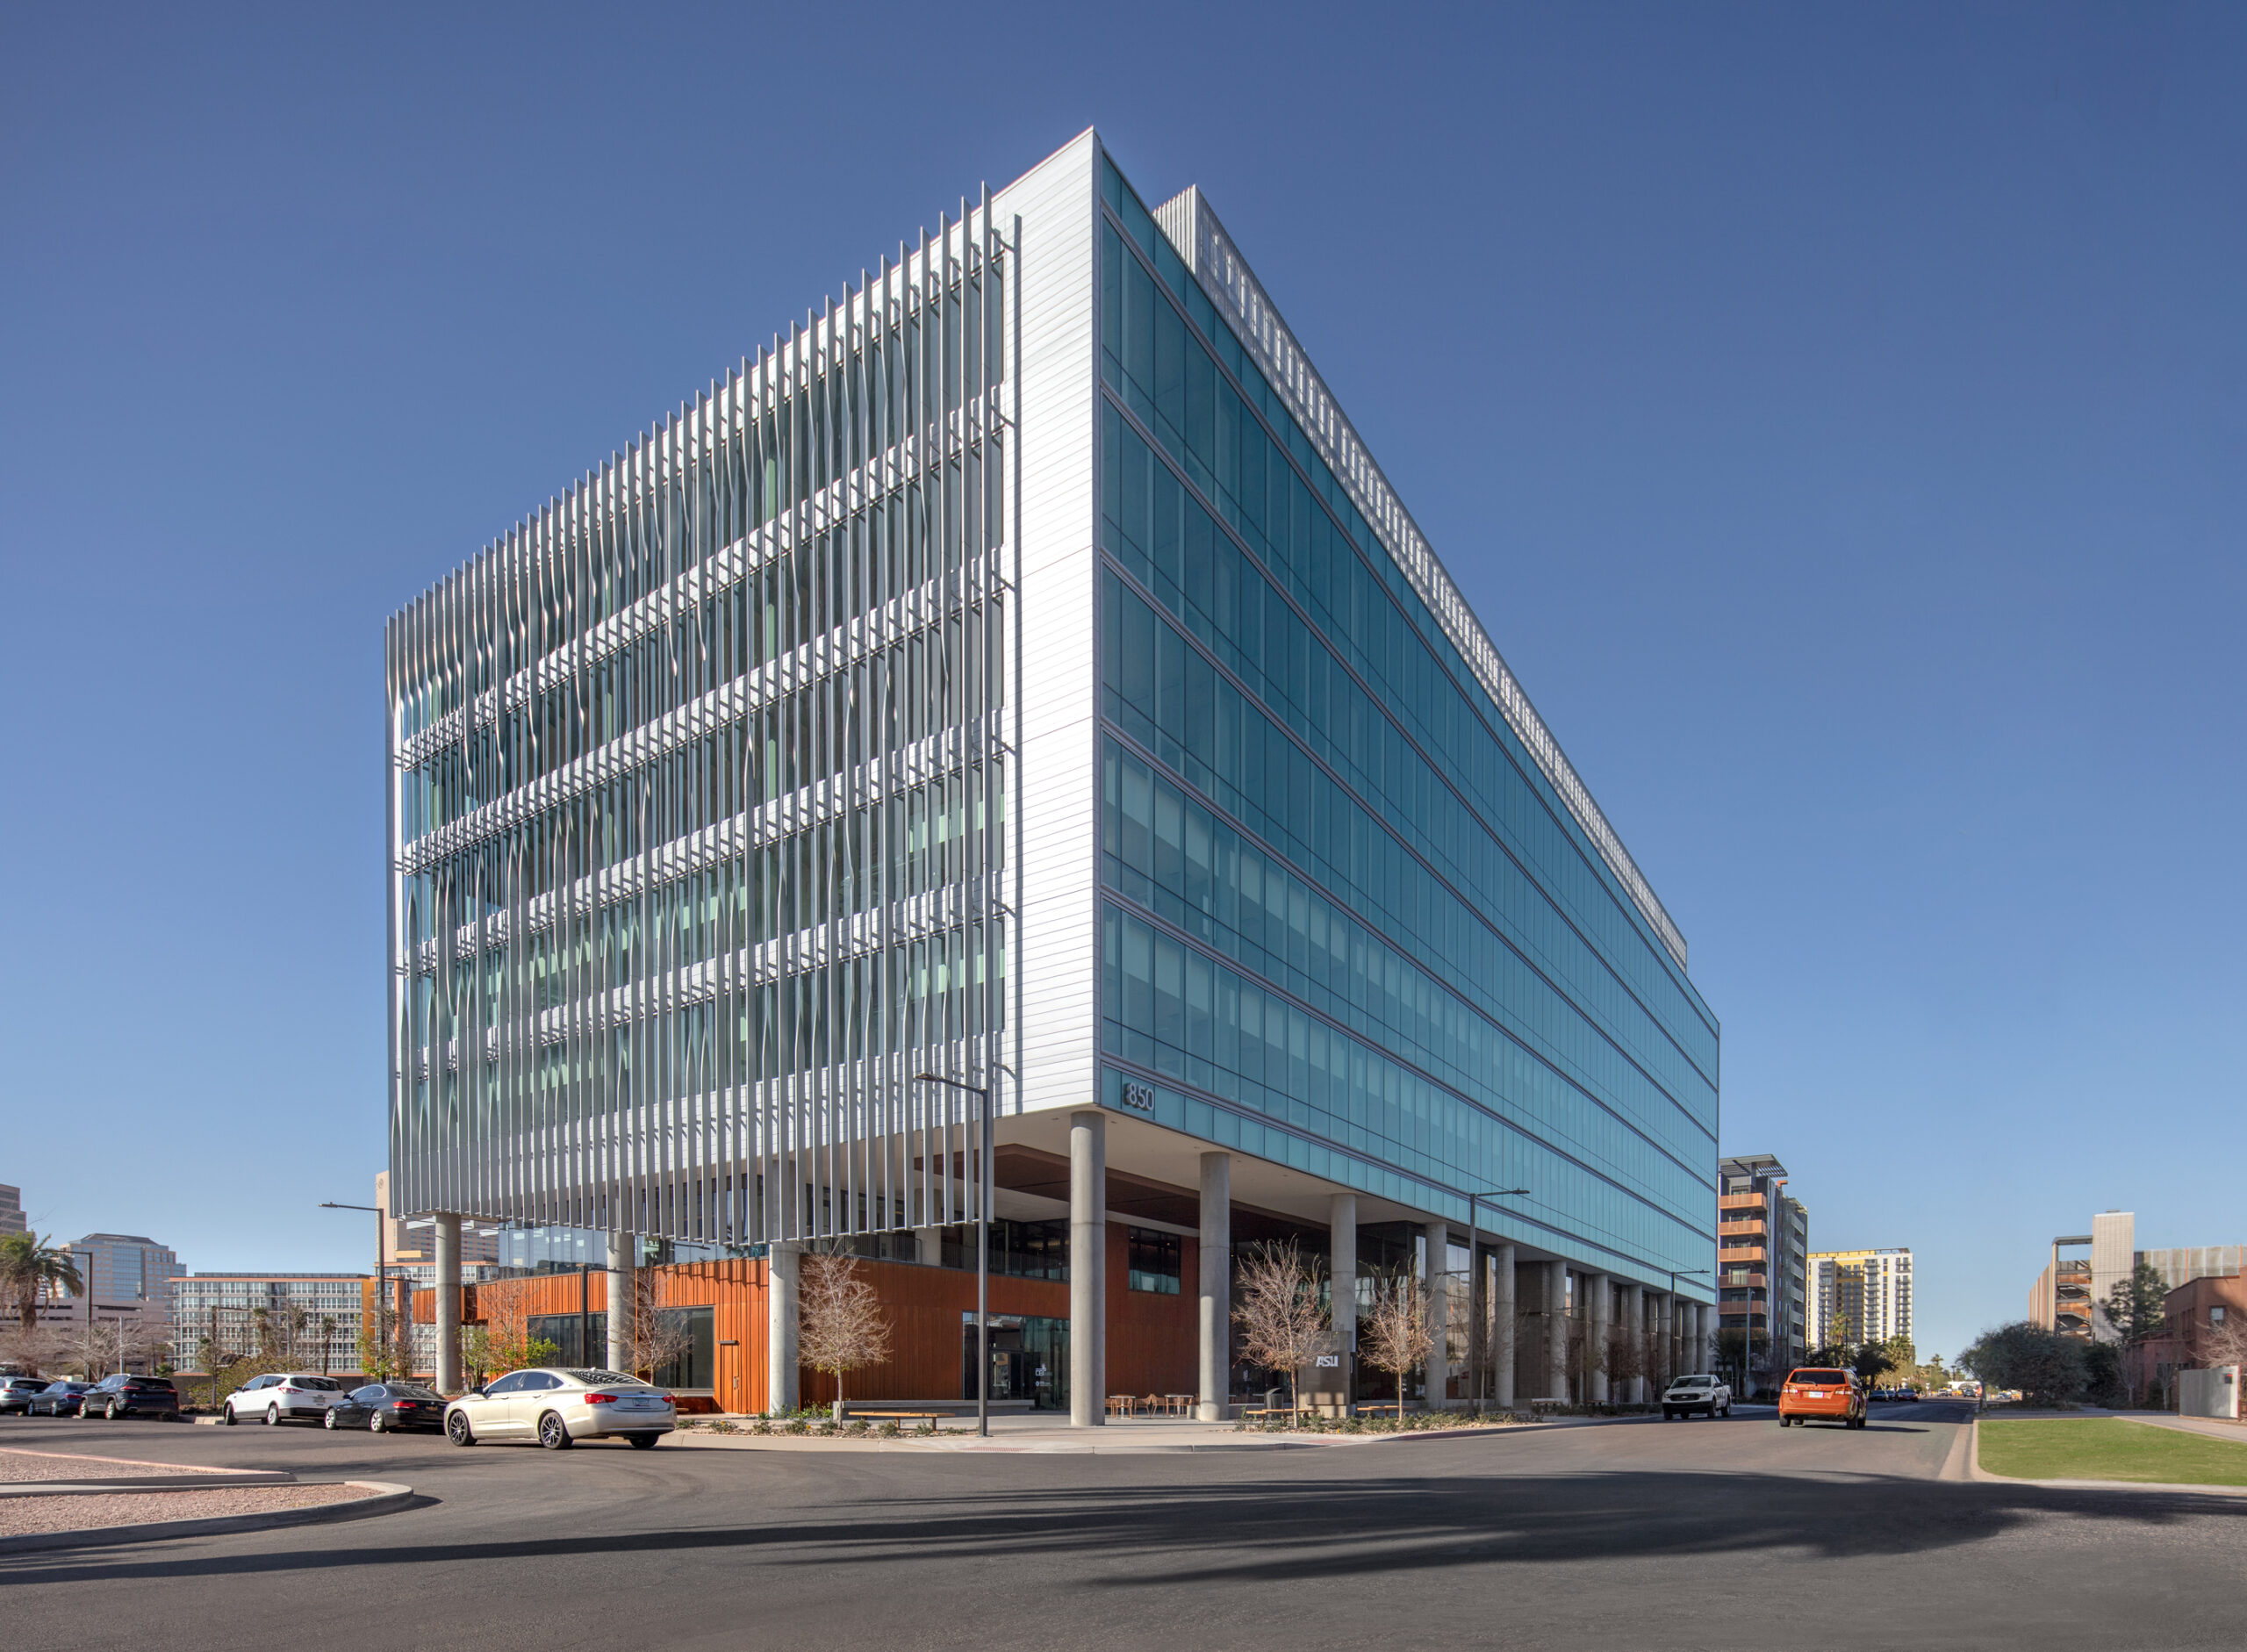 Wexford Science + Technology’s 850 PBC receives LEED Gold status